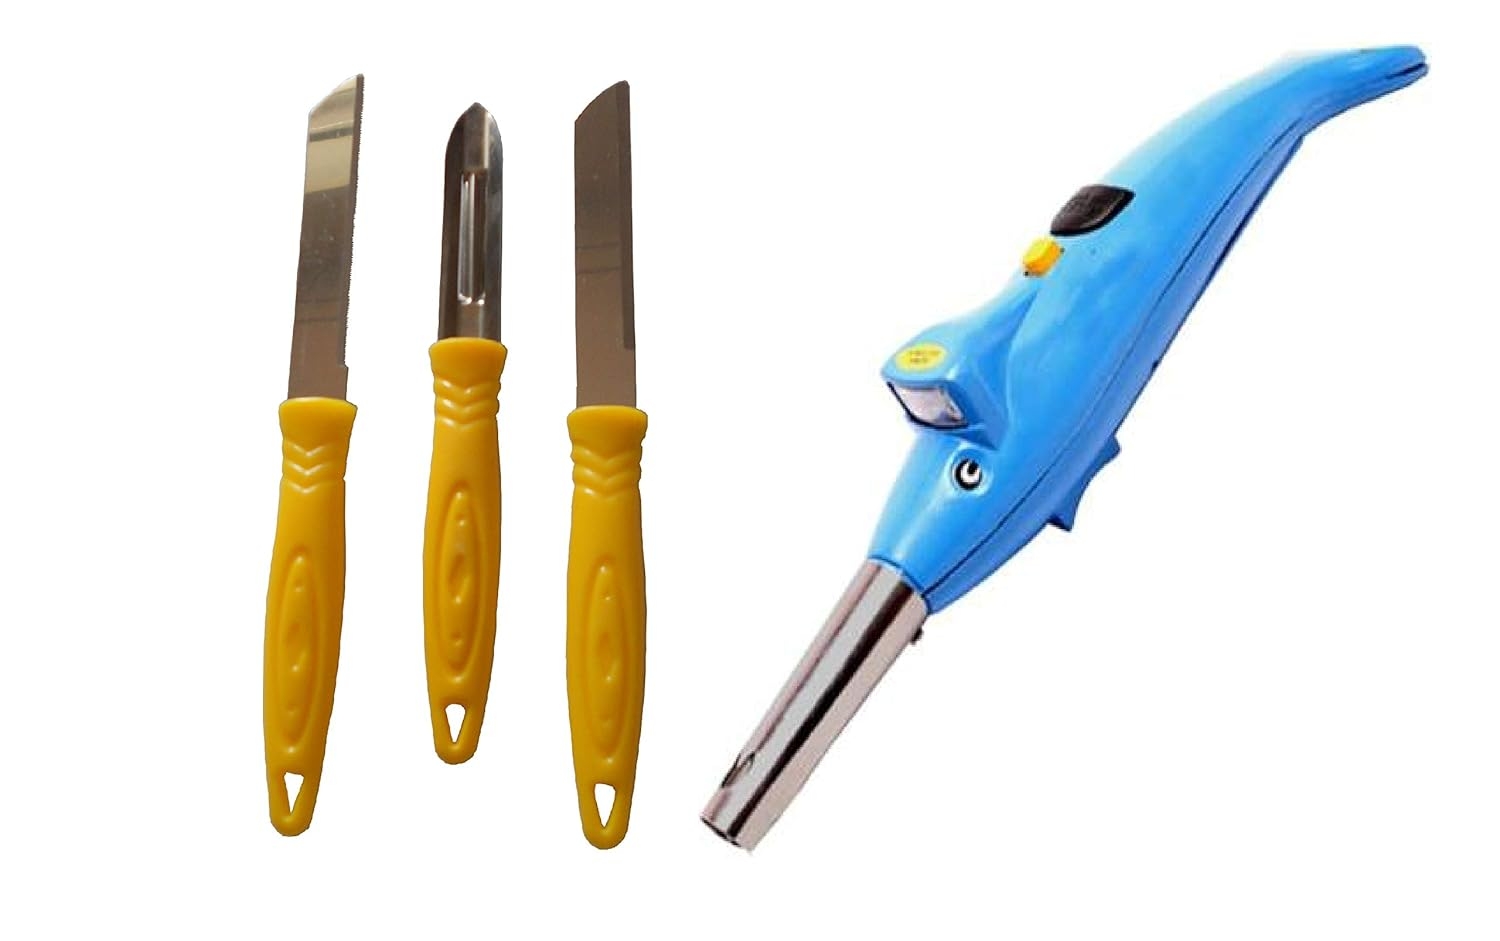 Plastic Stove Gas Lighter | Electric Dolphin Shaped | LED Torch | Knife, Sharp Wavy Edge Knives Set of 3 | Stainless Steel Peeler Gas Lighters